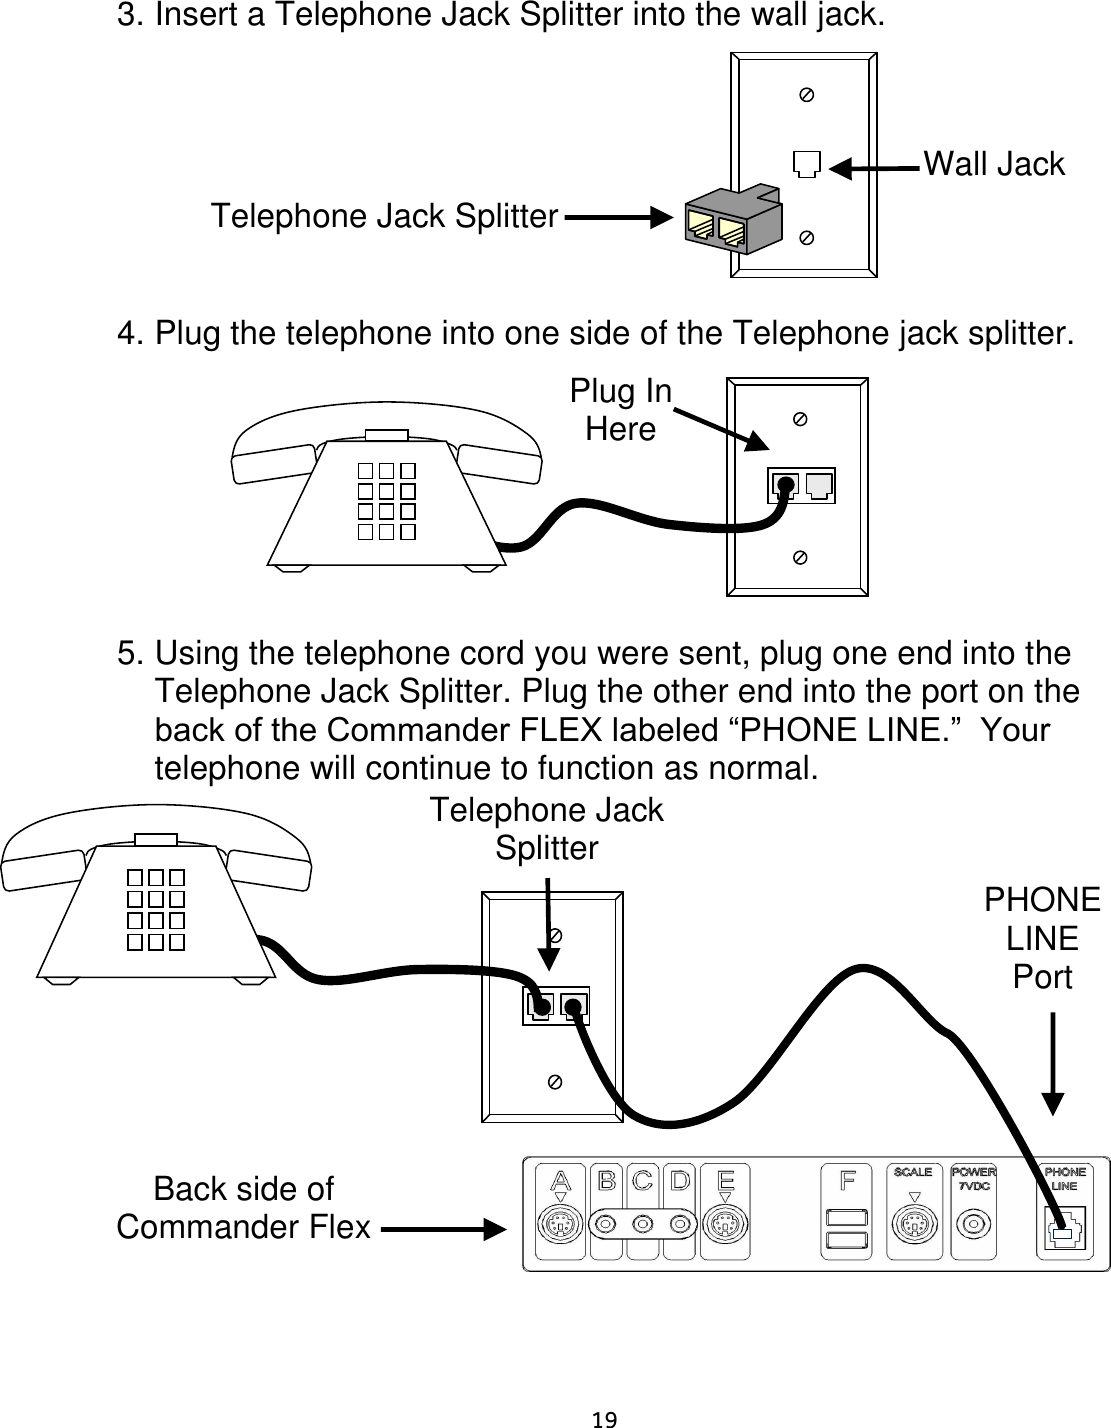     19  3. Insert a Telephone Jack Splitter into the wall jack.           4. Plug the telephone into one side of the Telephone jack splitter.                        5. Using the telephone cord you were sent, plug one end into the Telephone Jack Splitter. Plug the other end into the port on the back of the Commander FLEX labeled “PHONE LINE.”  Your telephone will continue to function as normal.                                              Telephone Jack Splitter Wall Jack Plug In Here Telephone Jack Splitter   Splitter  PHONE LINE Port  Back side of Commander Flex  